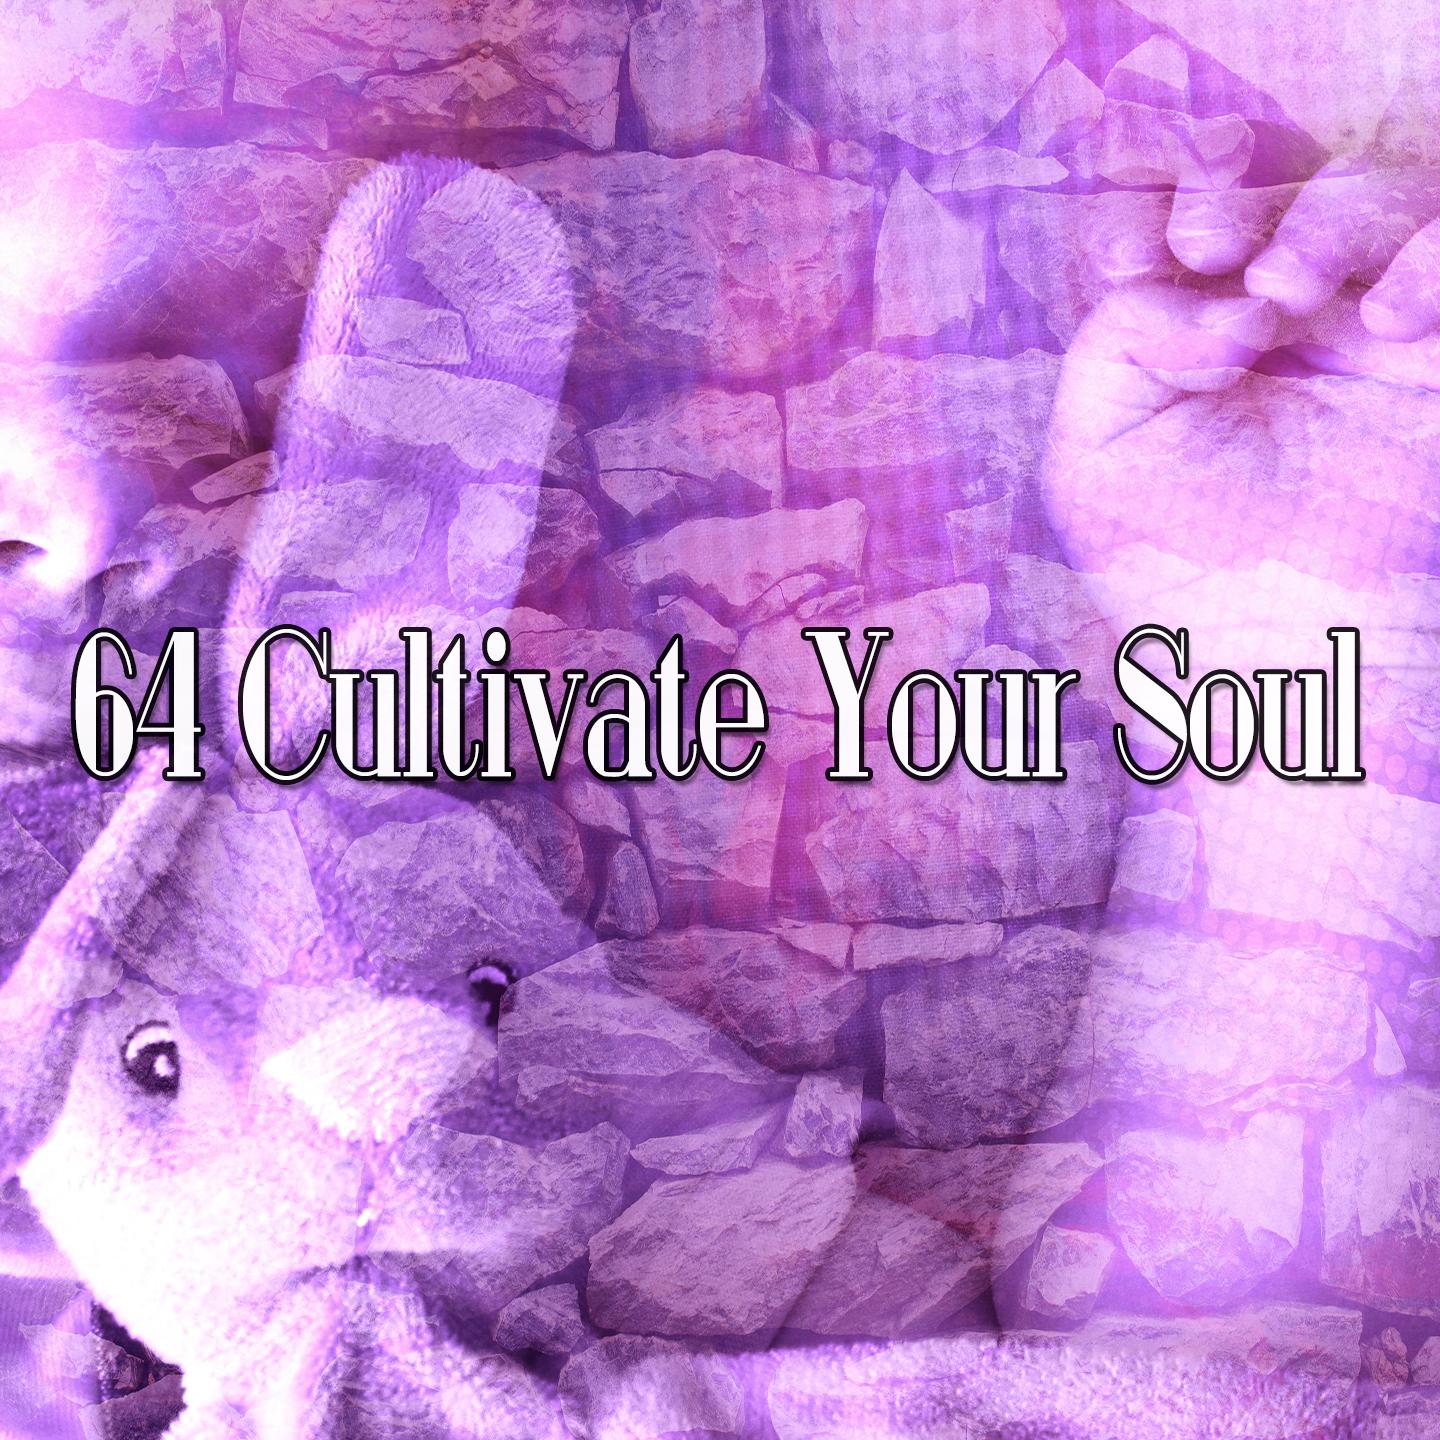 64 Cultivate Your Soul